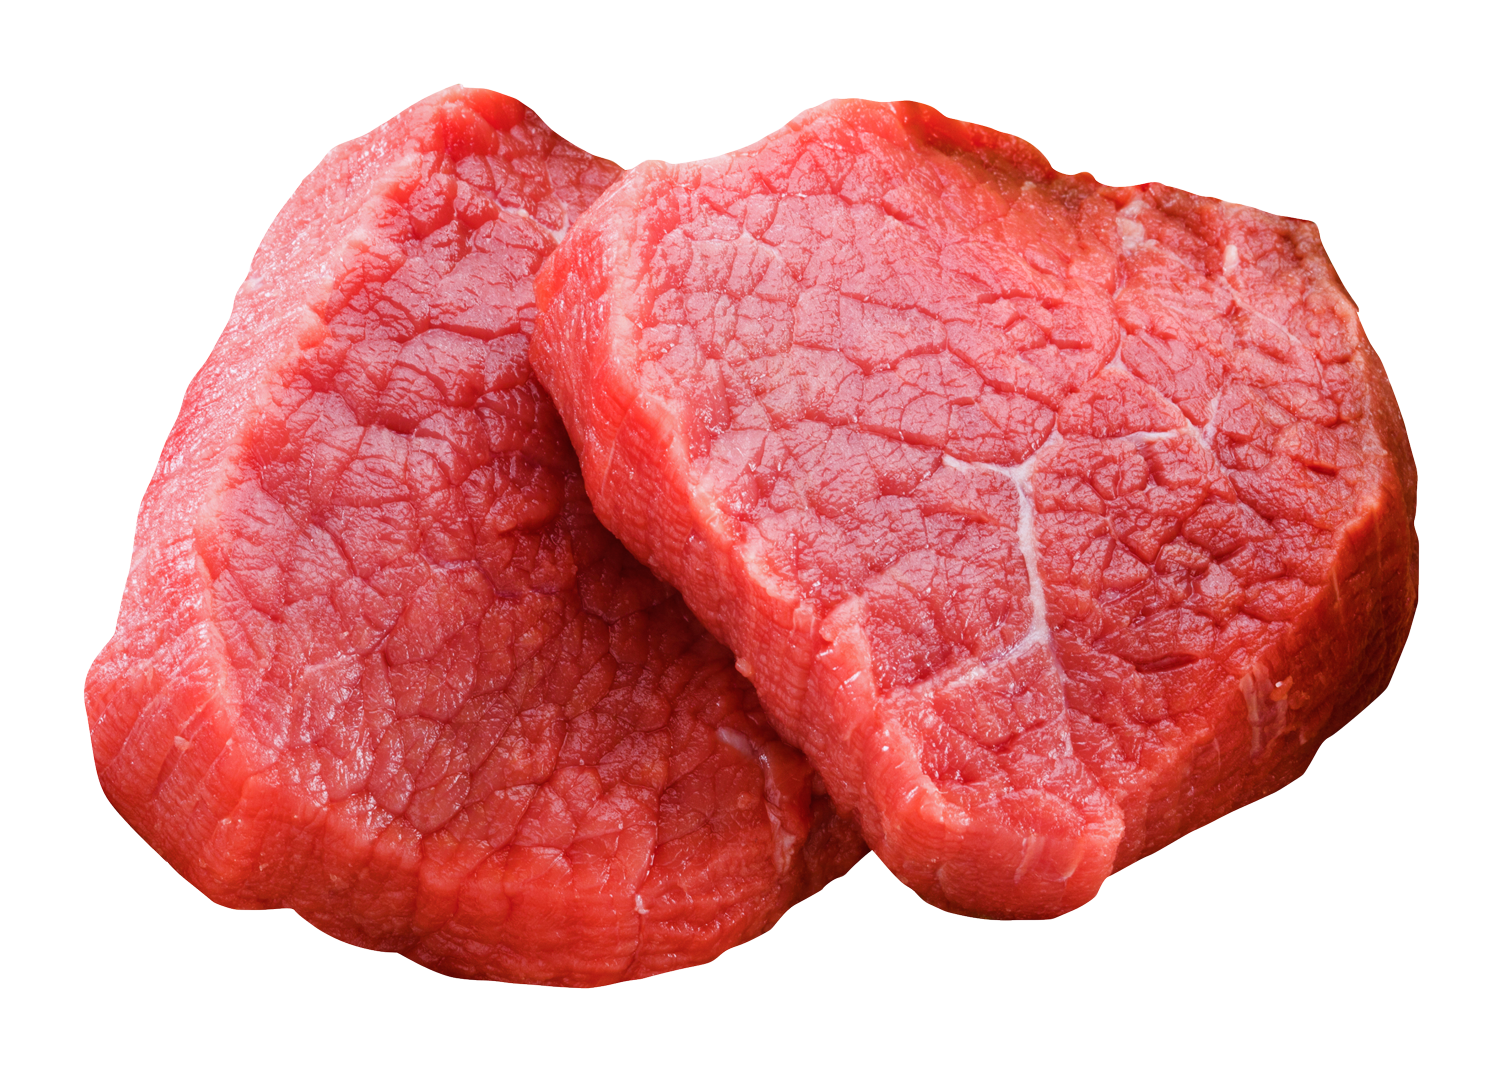 Meat Png Transparent Image - Meat, Transparent background PNG HD thumbnail